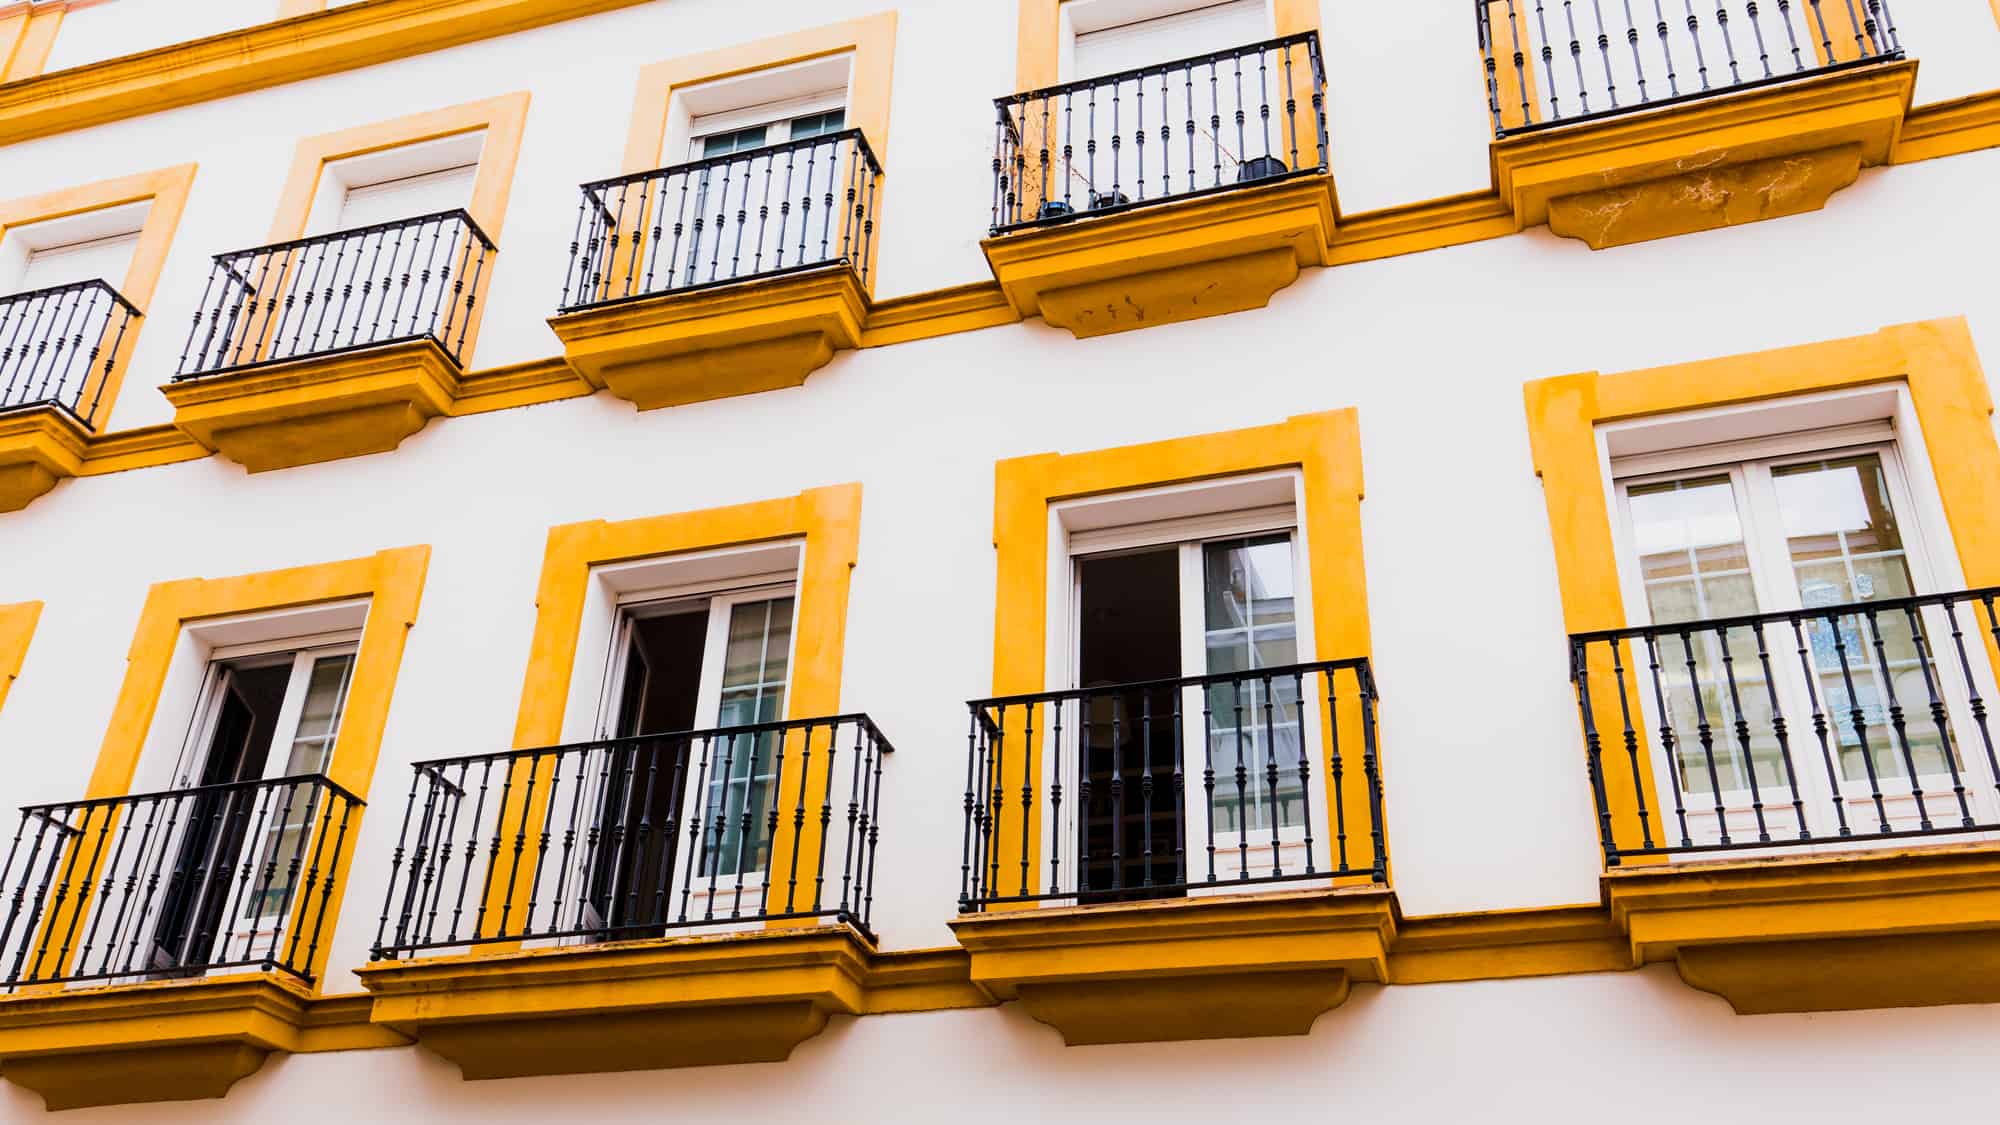 Traditional yellow and white colors of the architecture of Barrio Santa Cruz in Seville